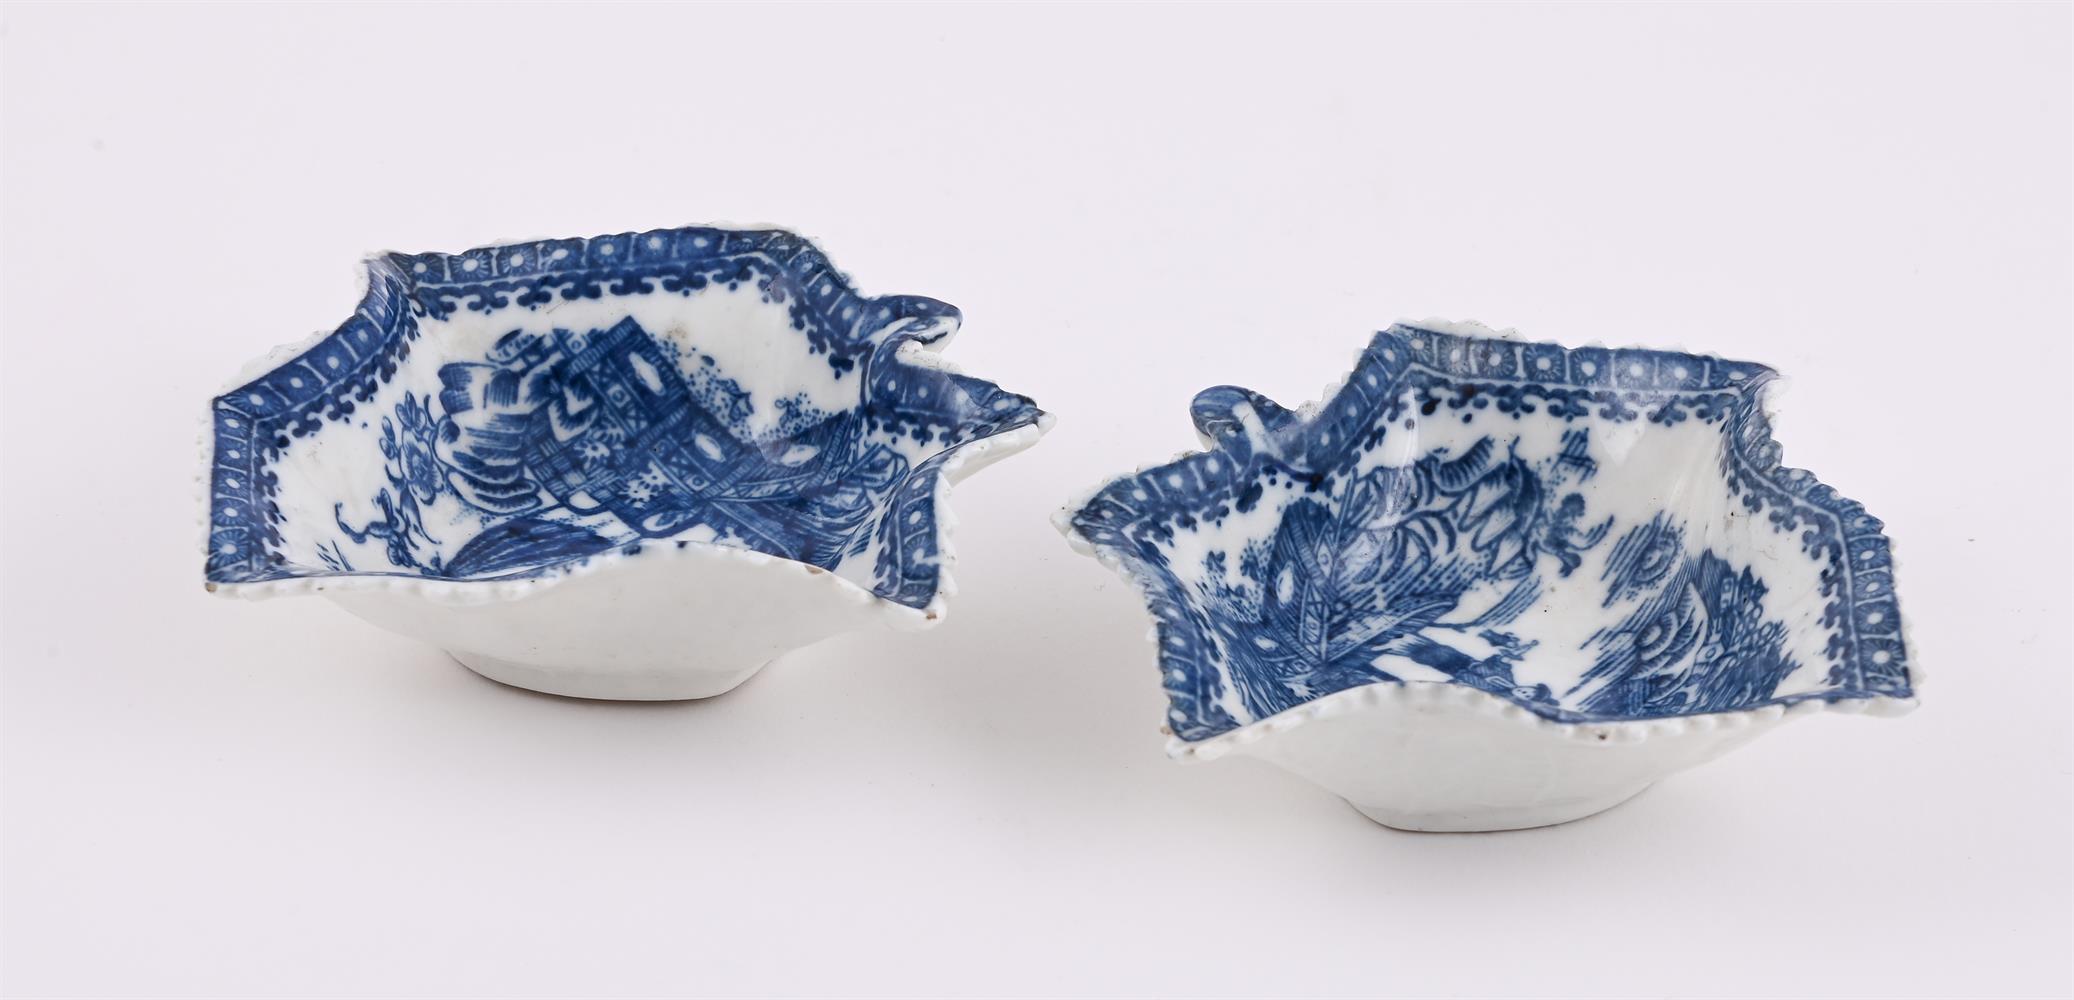 A PAIR OF CAUGHLEY BLUE AND WHITE PRINTED 'FISHERMAN & CORMORANT' PATTERN LEAF-SHAPED PICKLE DISHES - Image 2 of 2